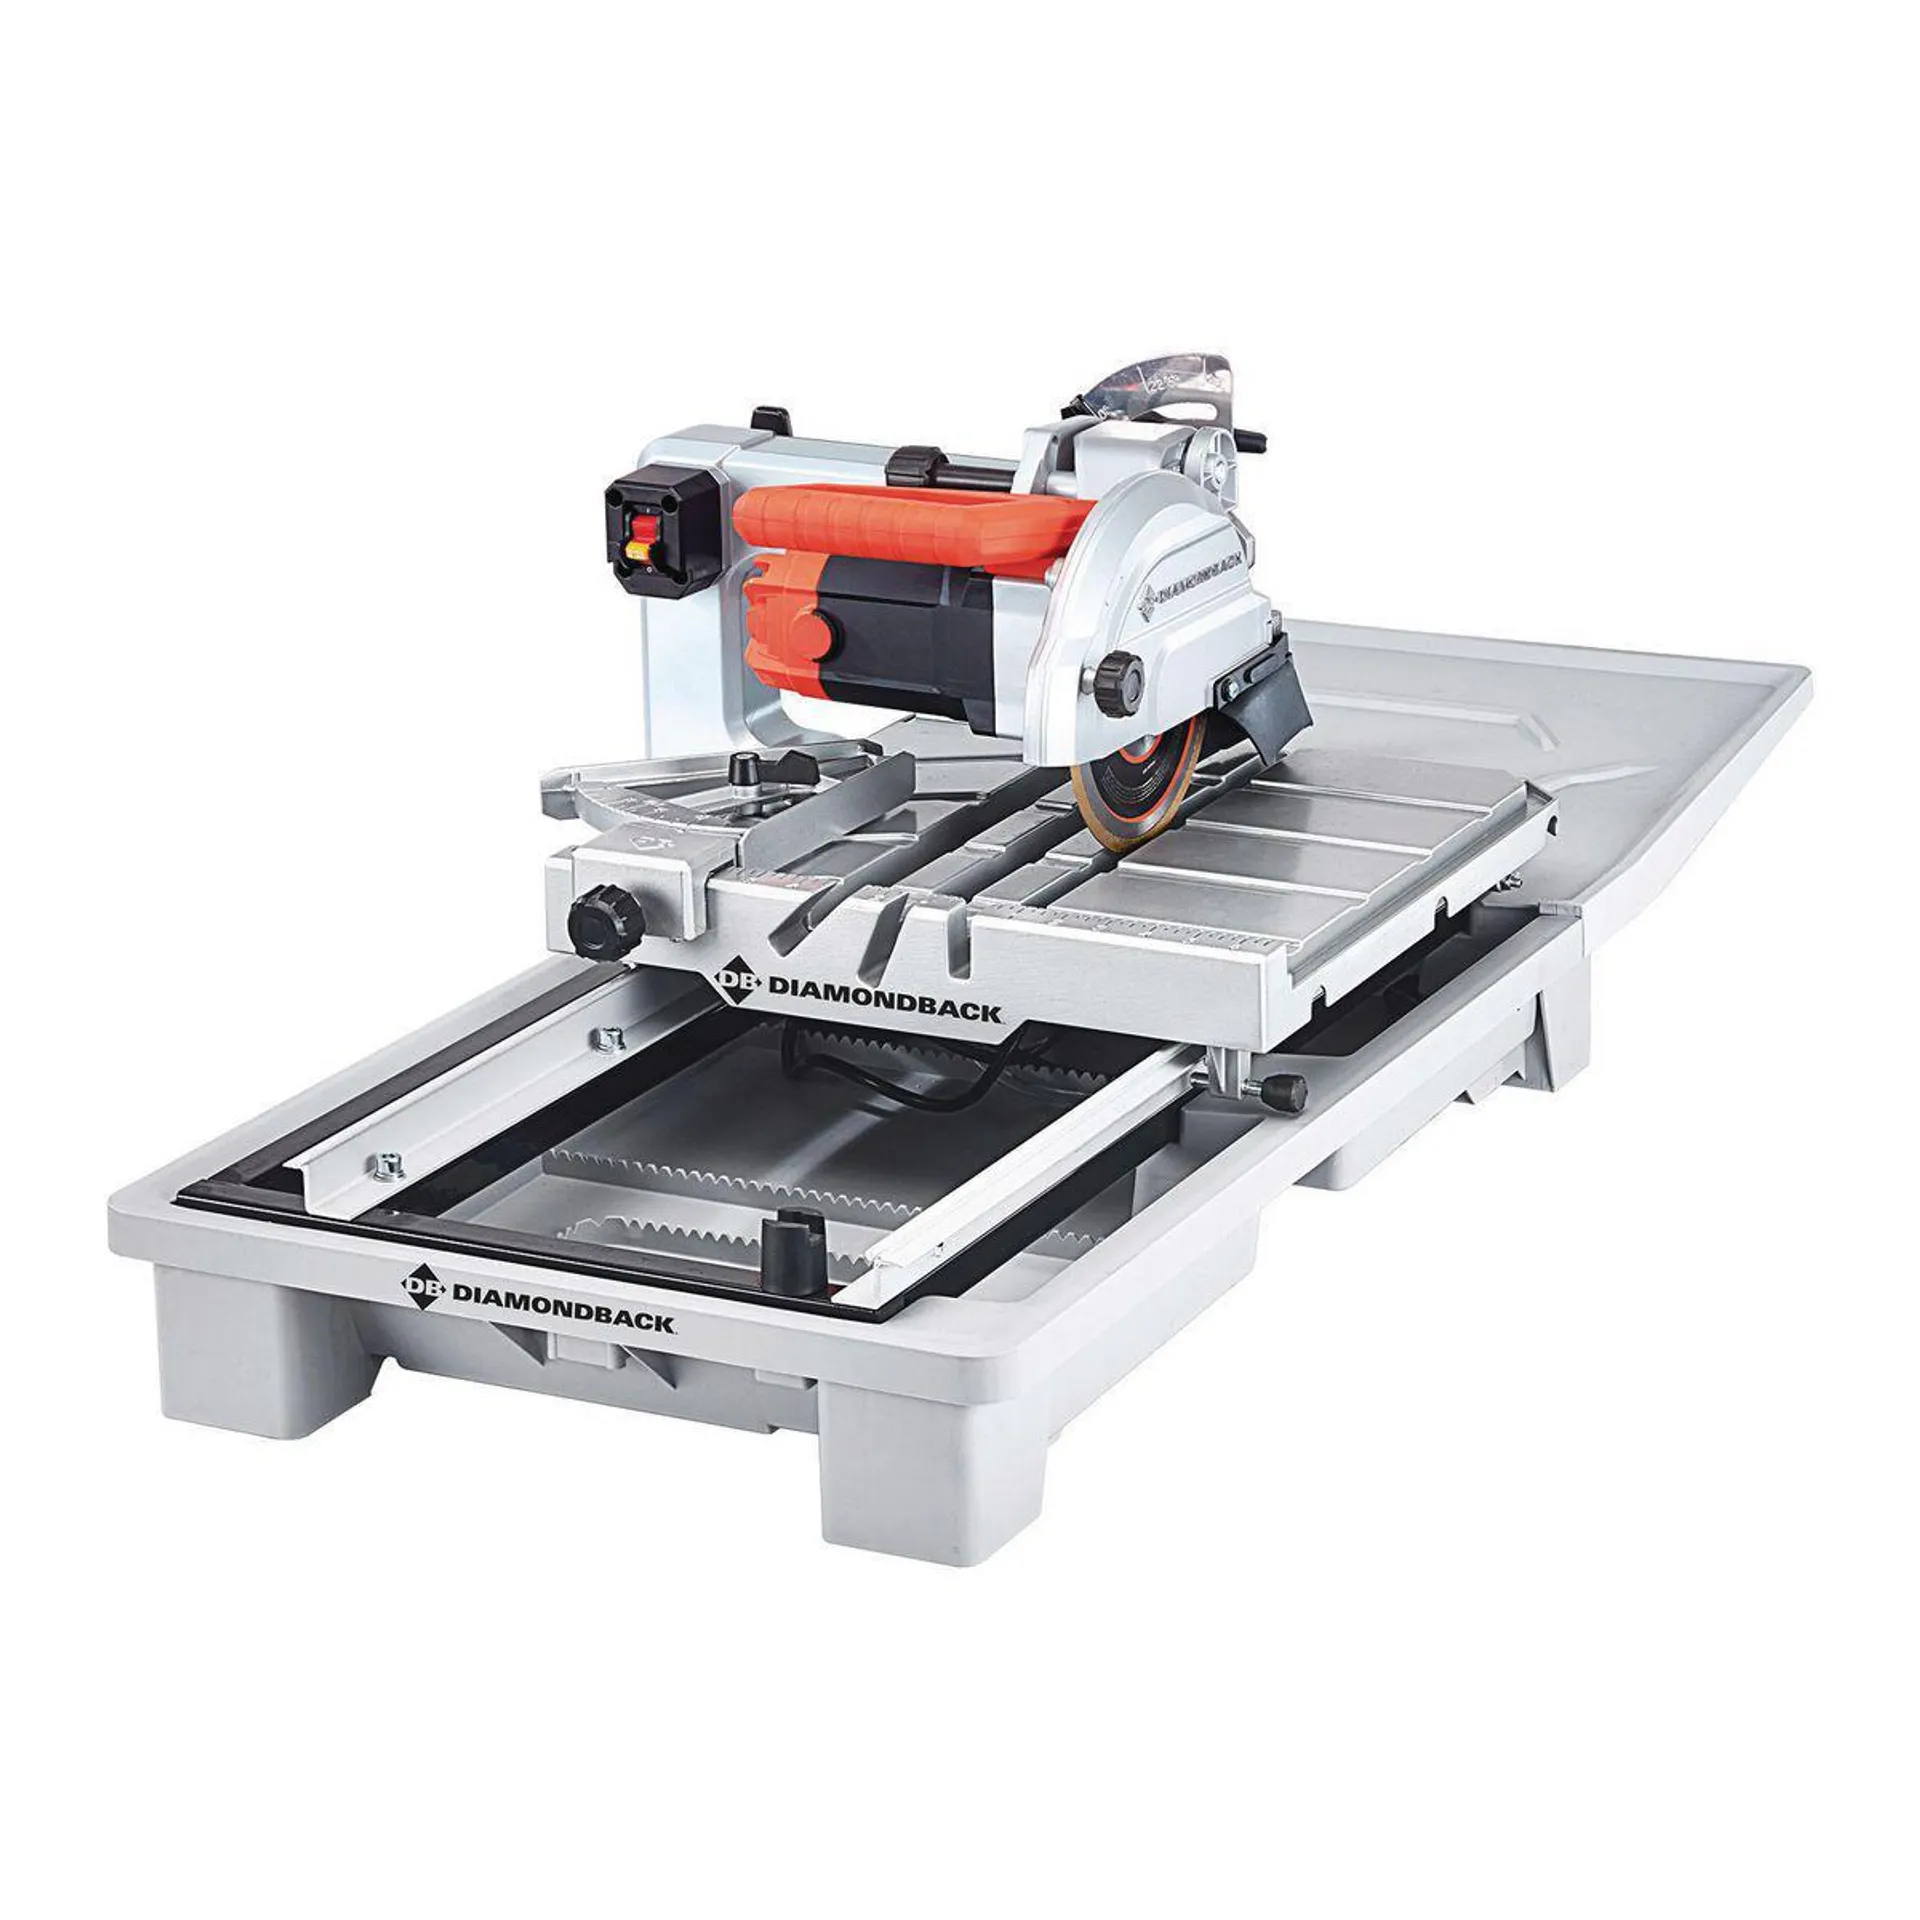 10 Amp, 7 in. Wet Tile Saw with Sliding Table